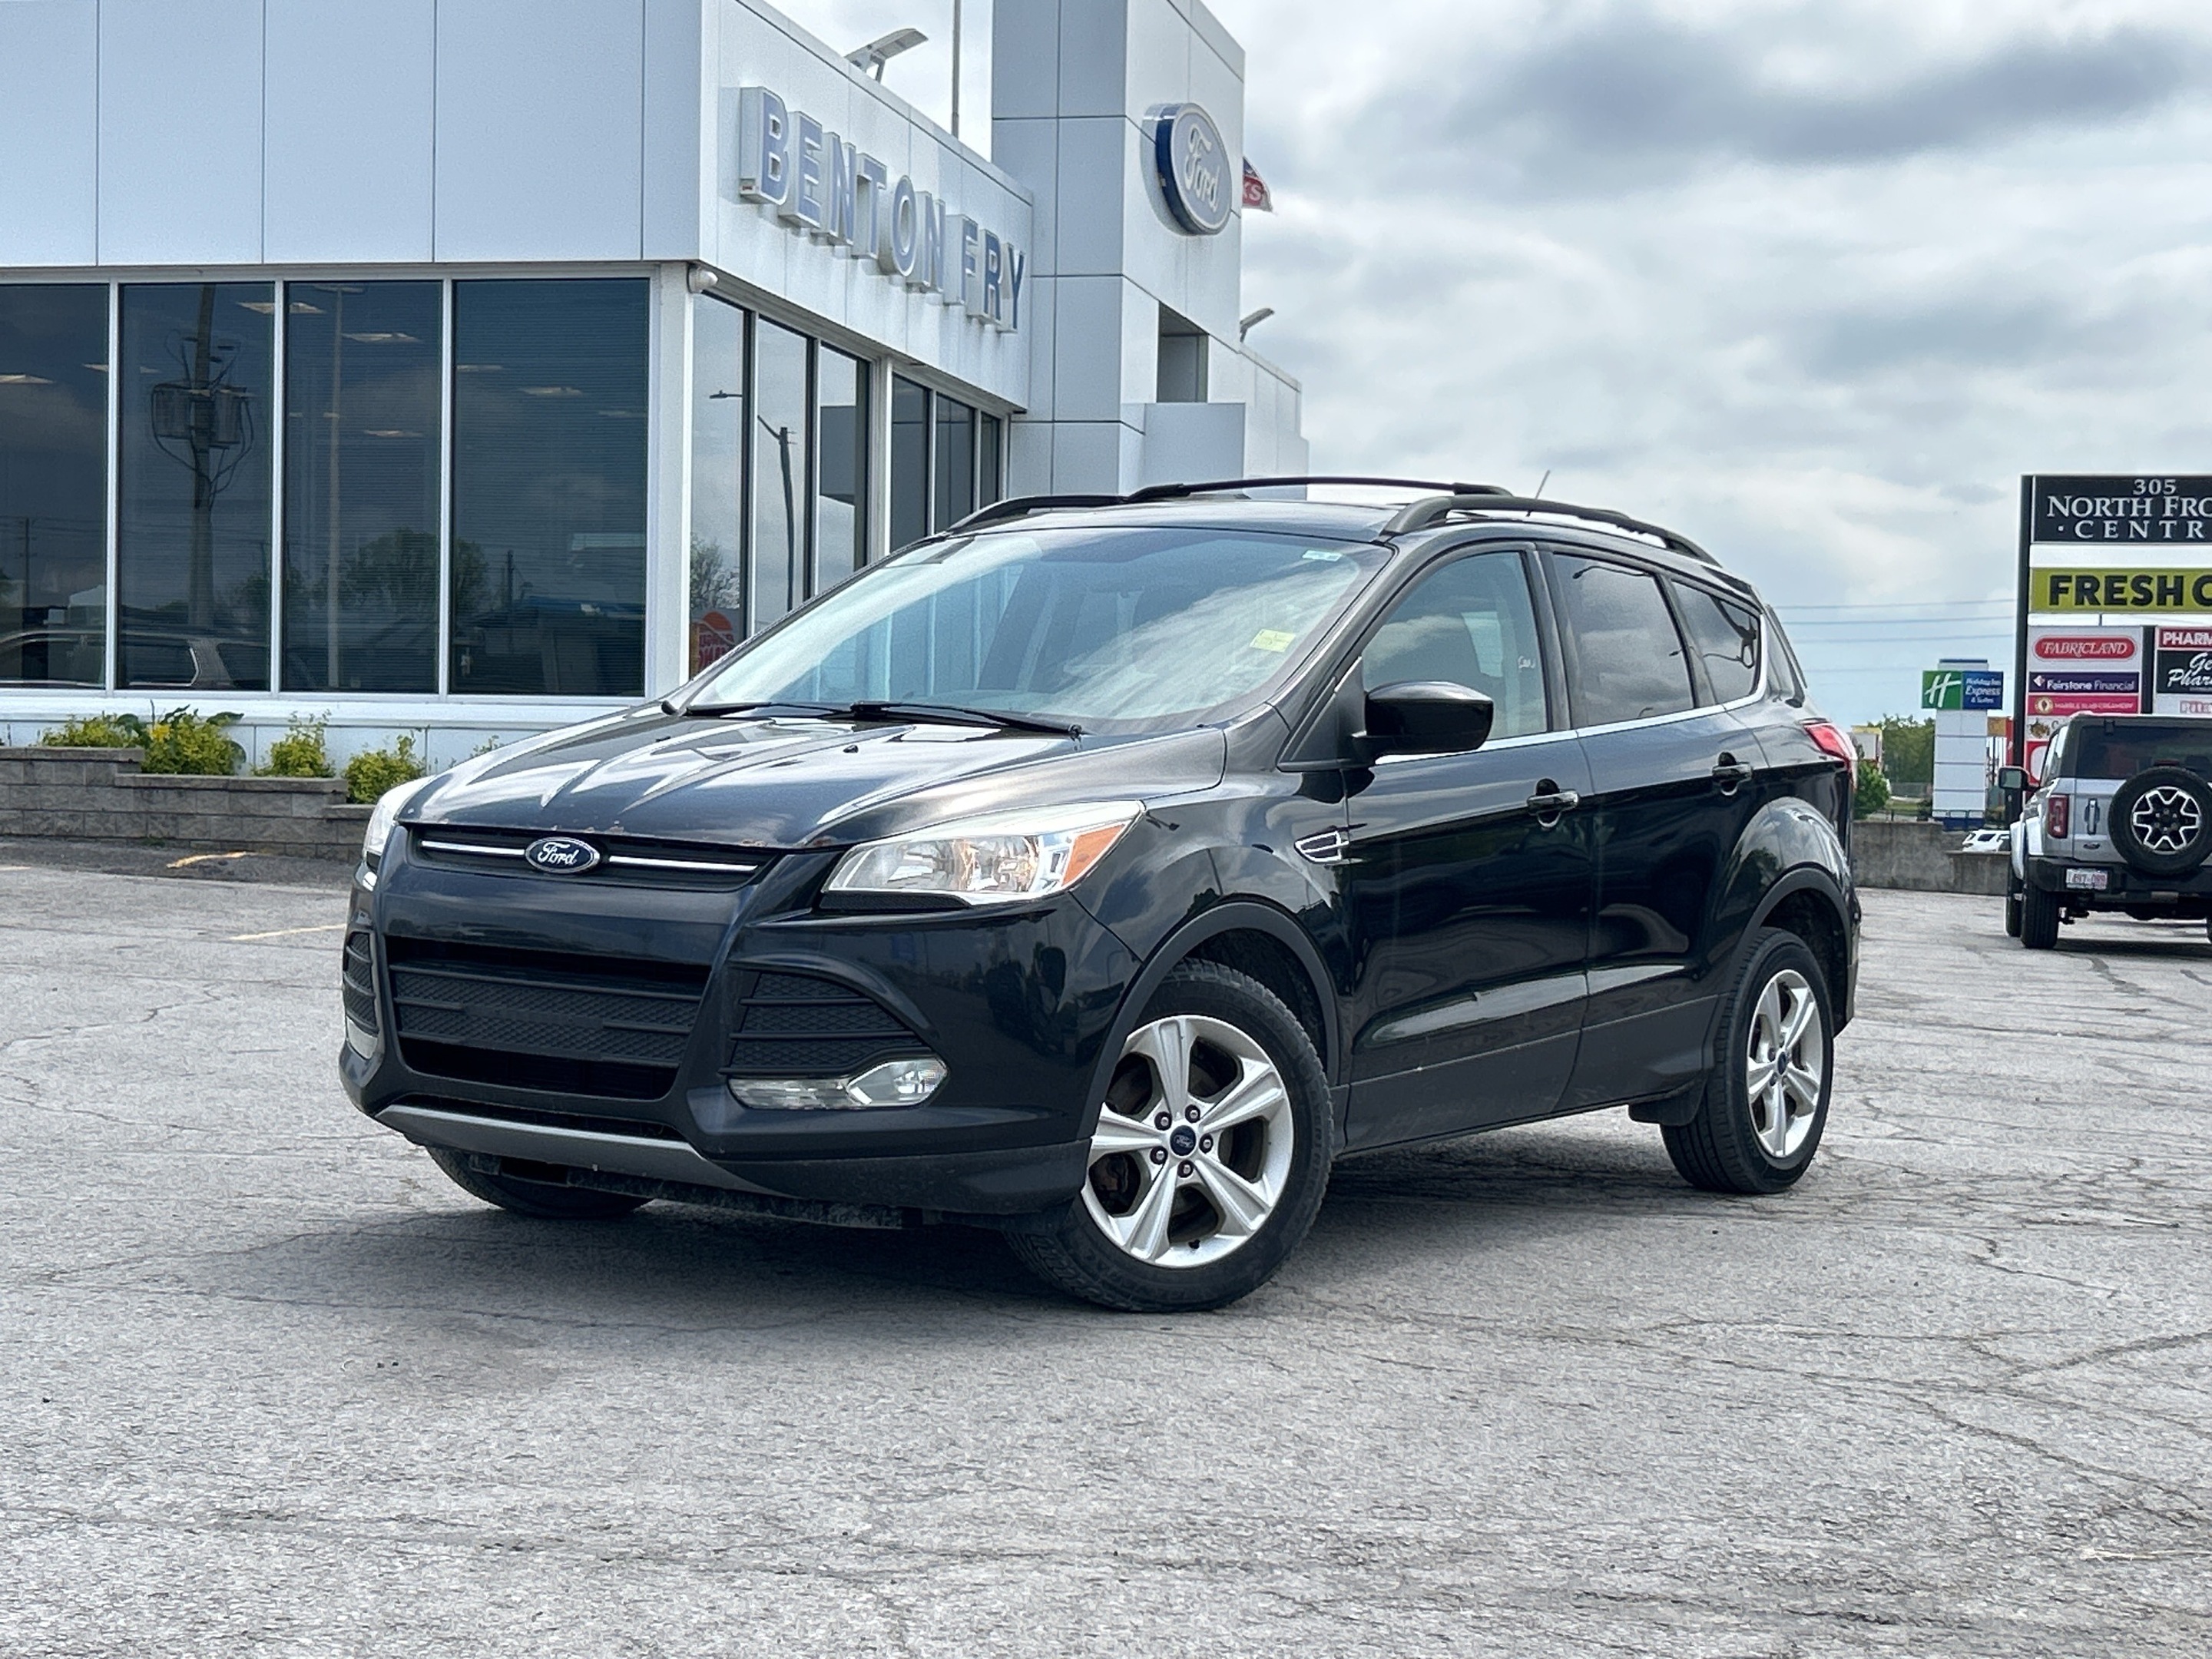 2015 Ford Escape SE - SOLD AS IS leather seats, moon roof, 1.6l